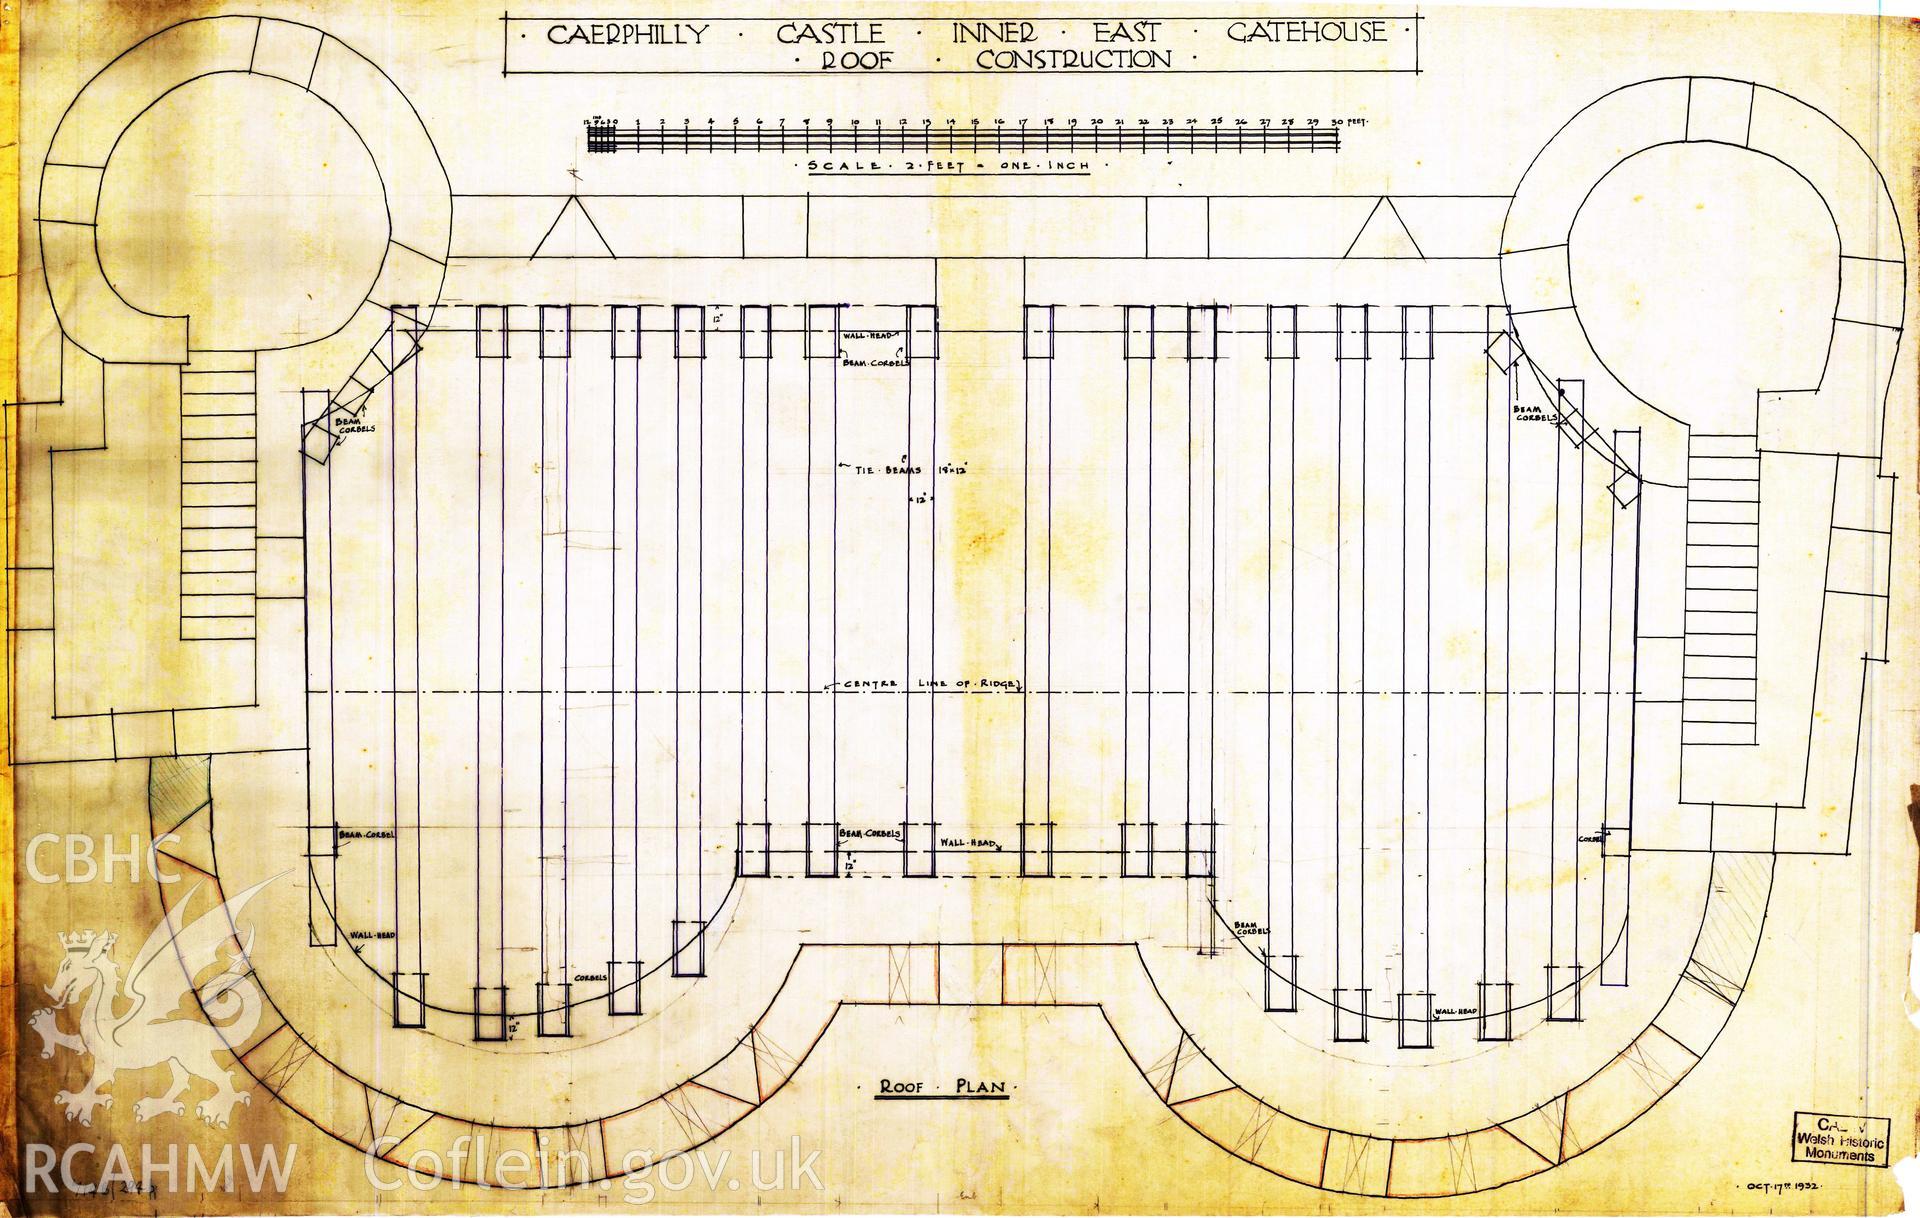 Cadw guardianship monument drawing of Caerphilly Castle. Inner E gate, roof beam plan. Cadw Ref. No:714B/294b. Scale 1:24.